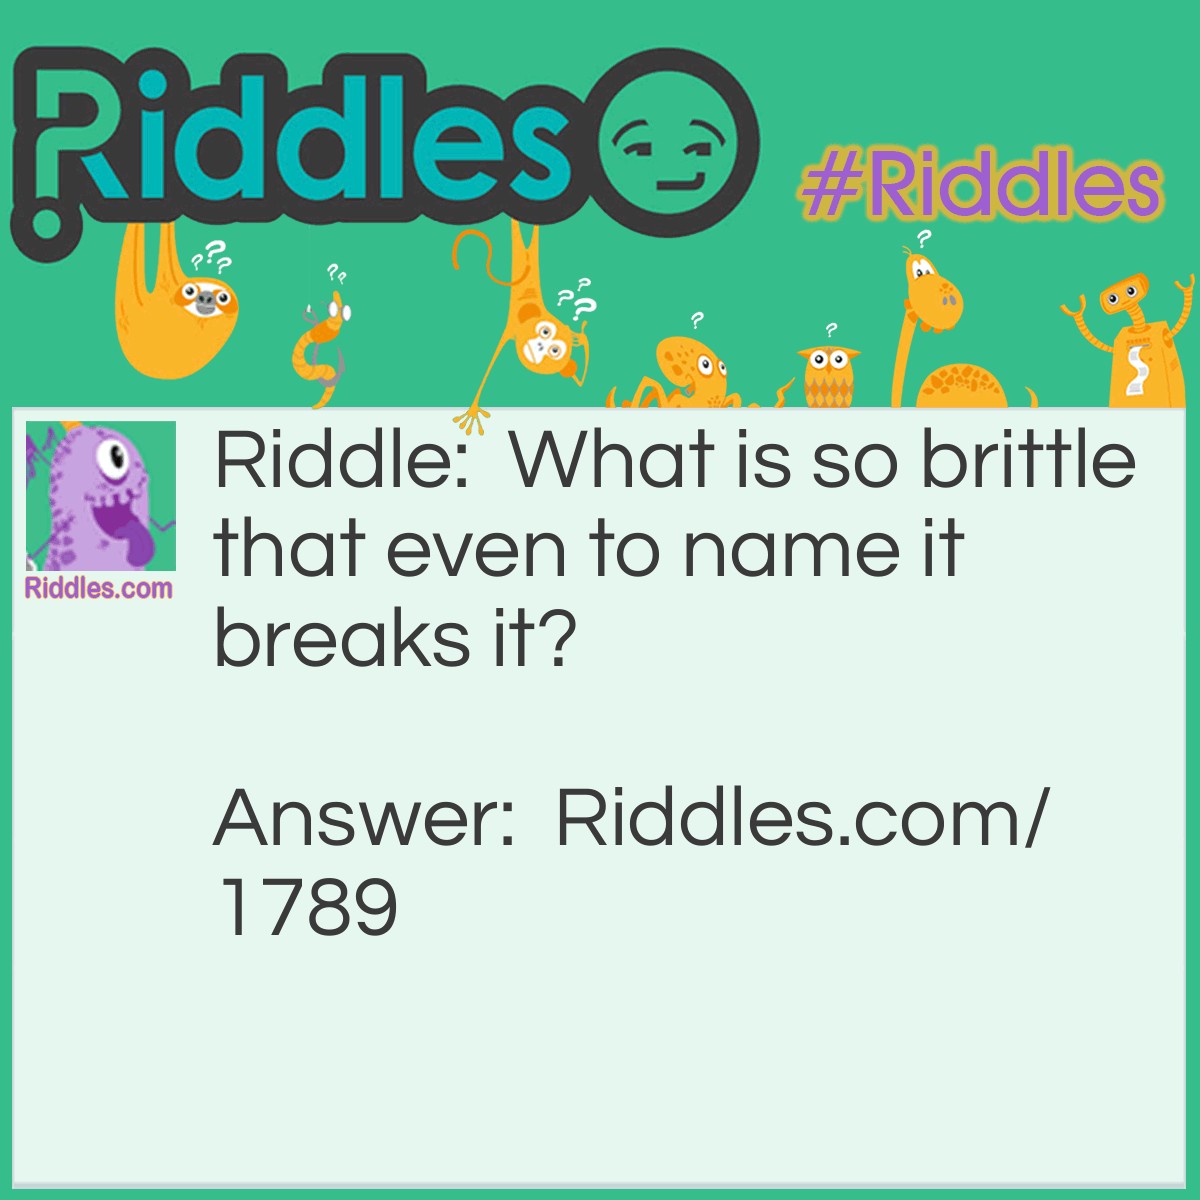 Riddle: What is so brittle that even to name it breaks it? Answer: Silence.